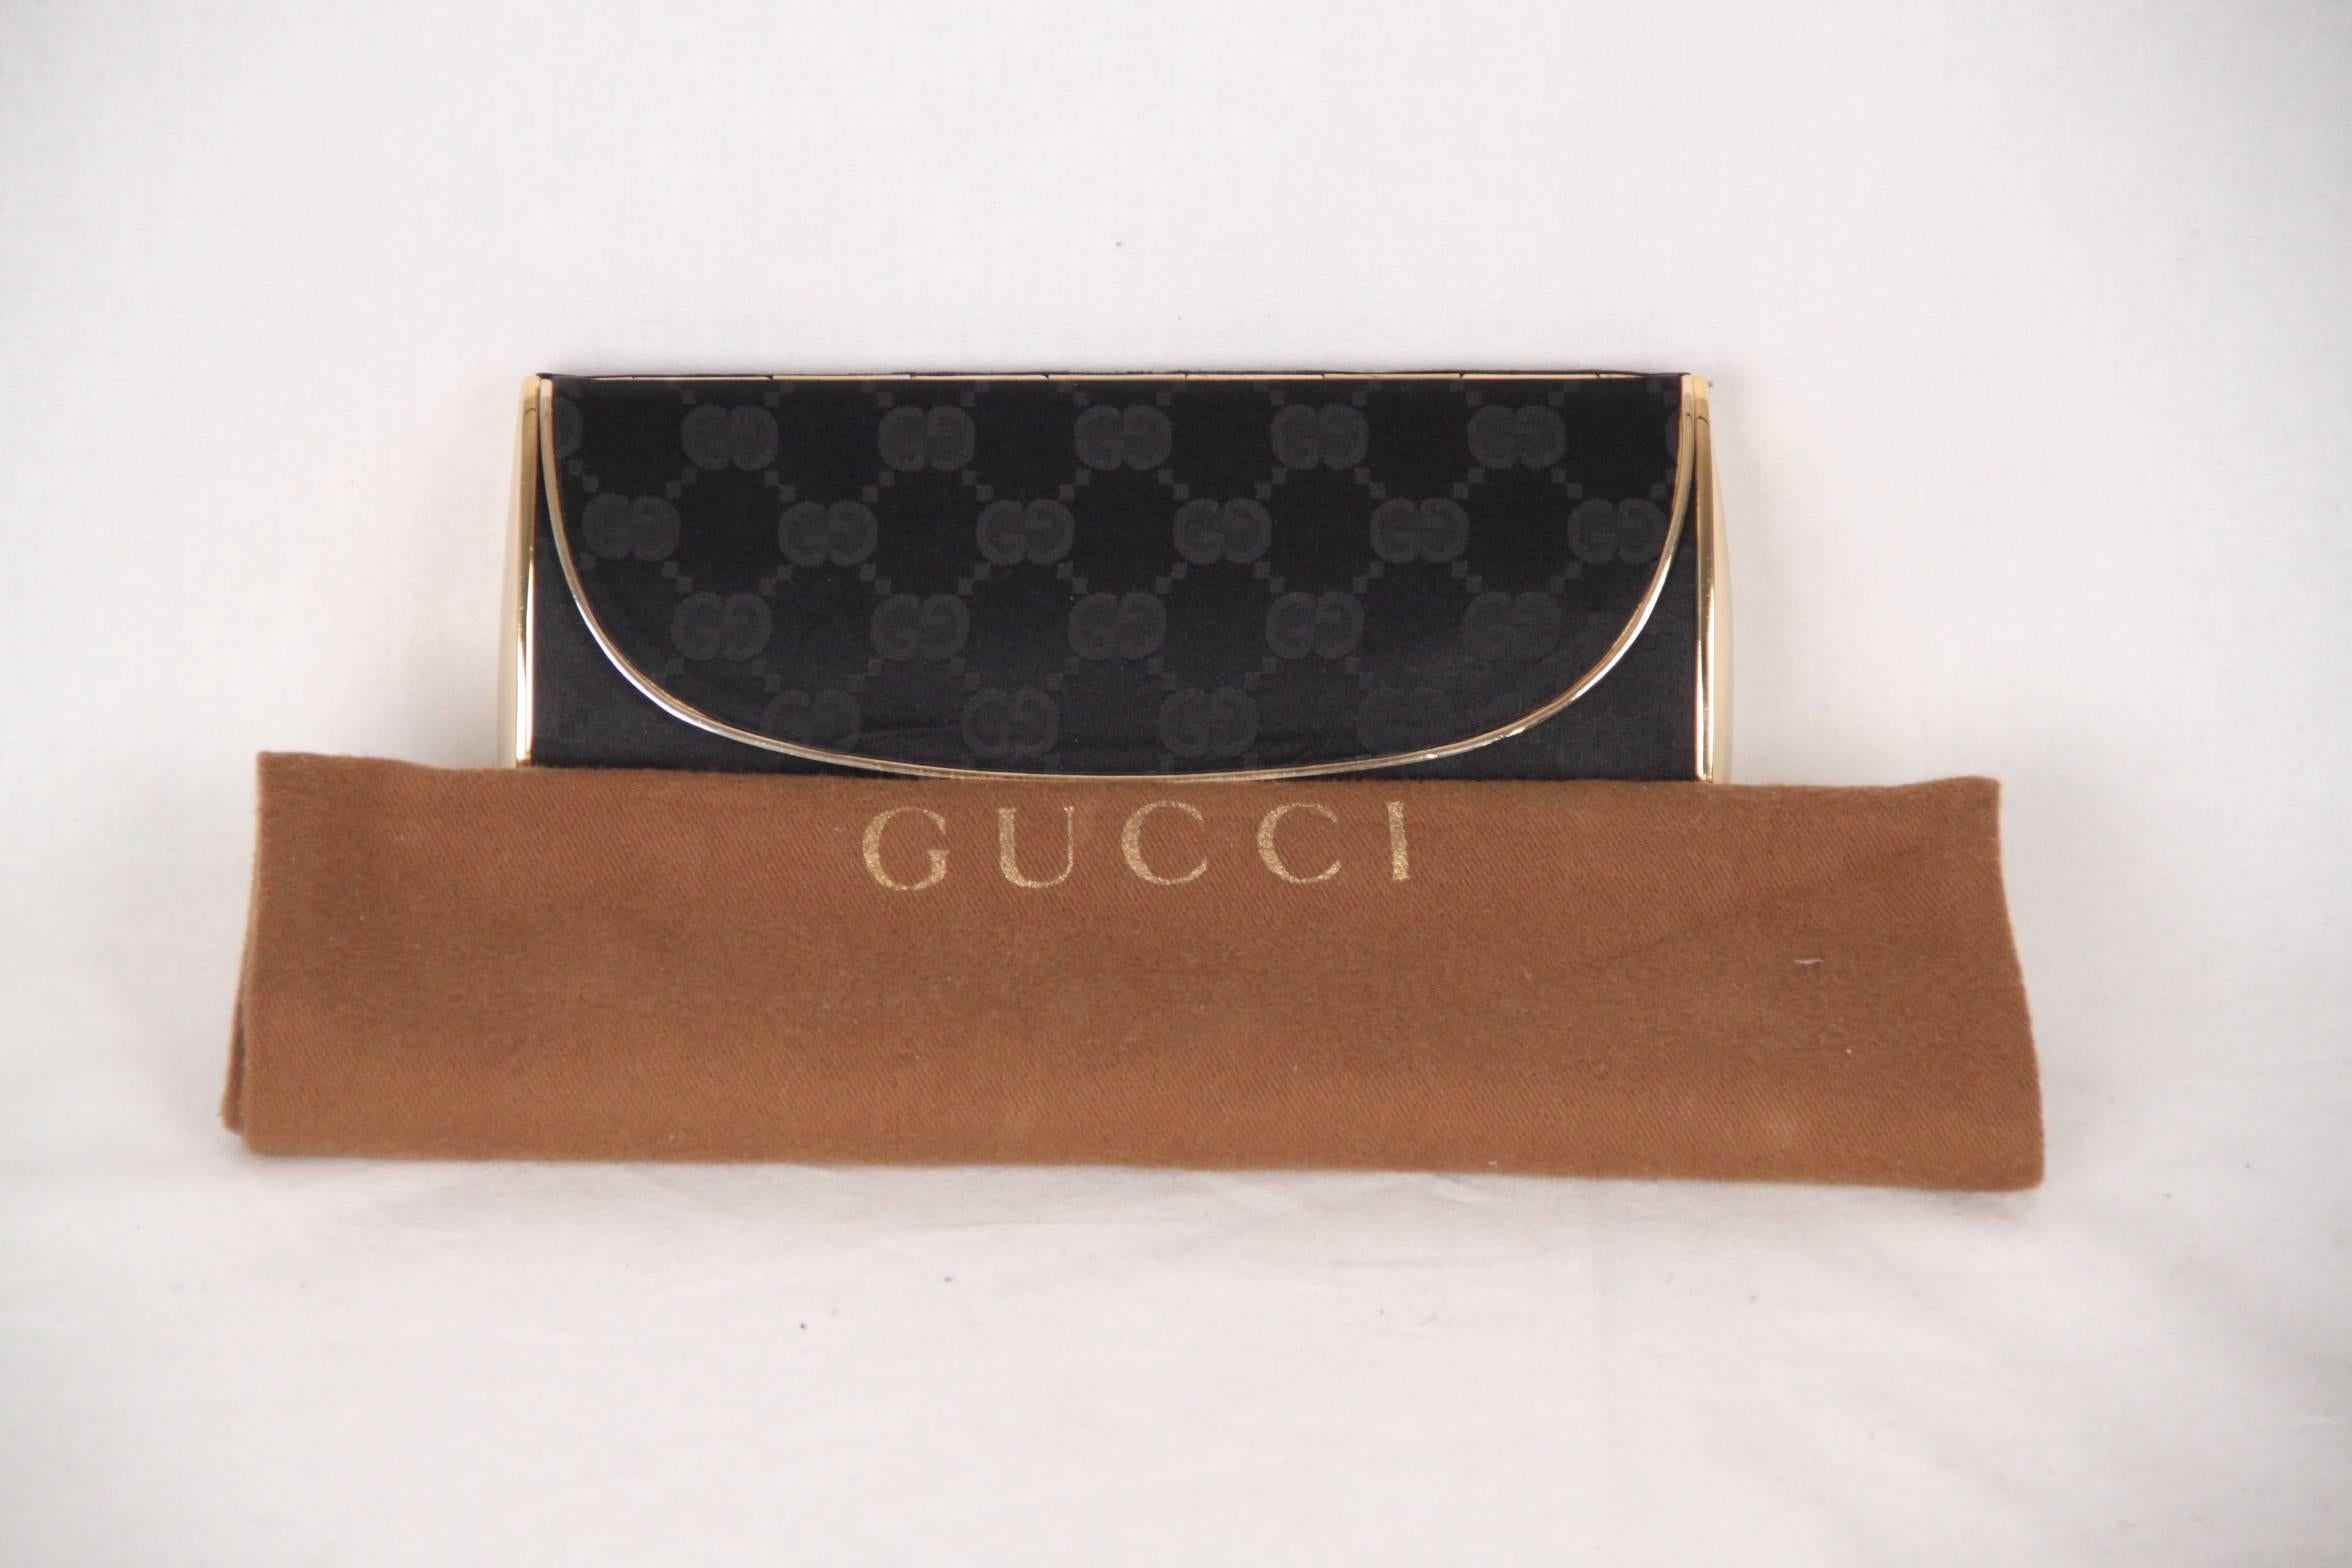 - Vintage gold metal box clutch by GUCCI
- Black GG - GUCCI monogram fabric covering 
- Flap closure
- A built-in mirror on the reverse of the metal flap
- The purse is lined in a velvet-like fabric
- Measurements: 3 1/2 x 7 1/4 x 1 3/4 nches - 8,9